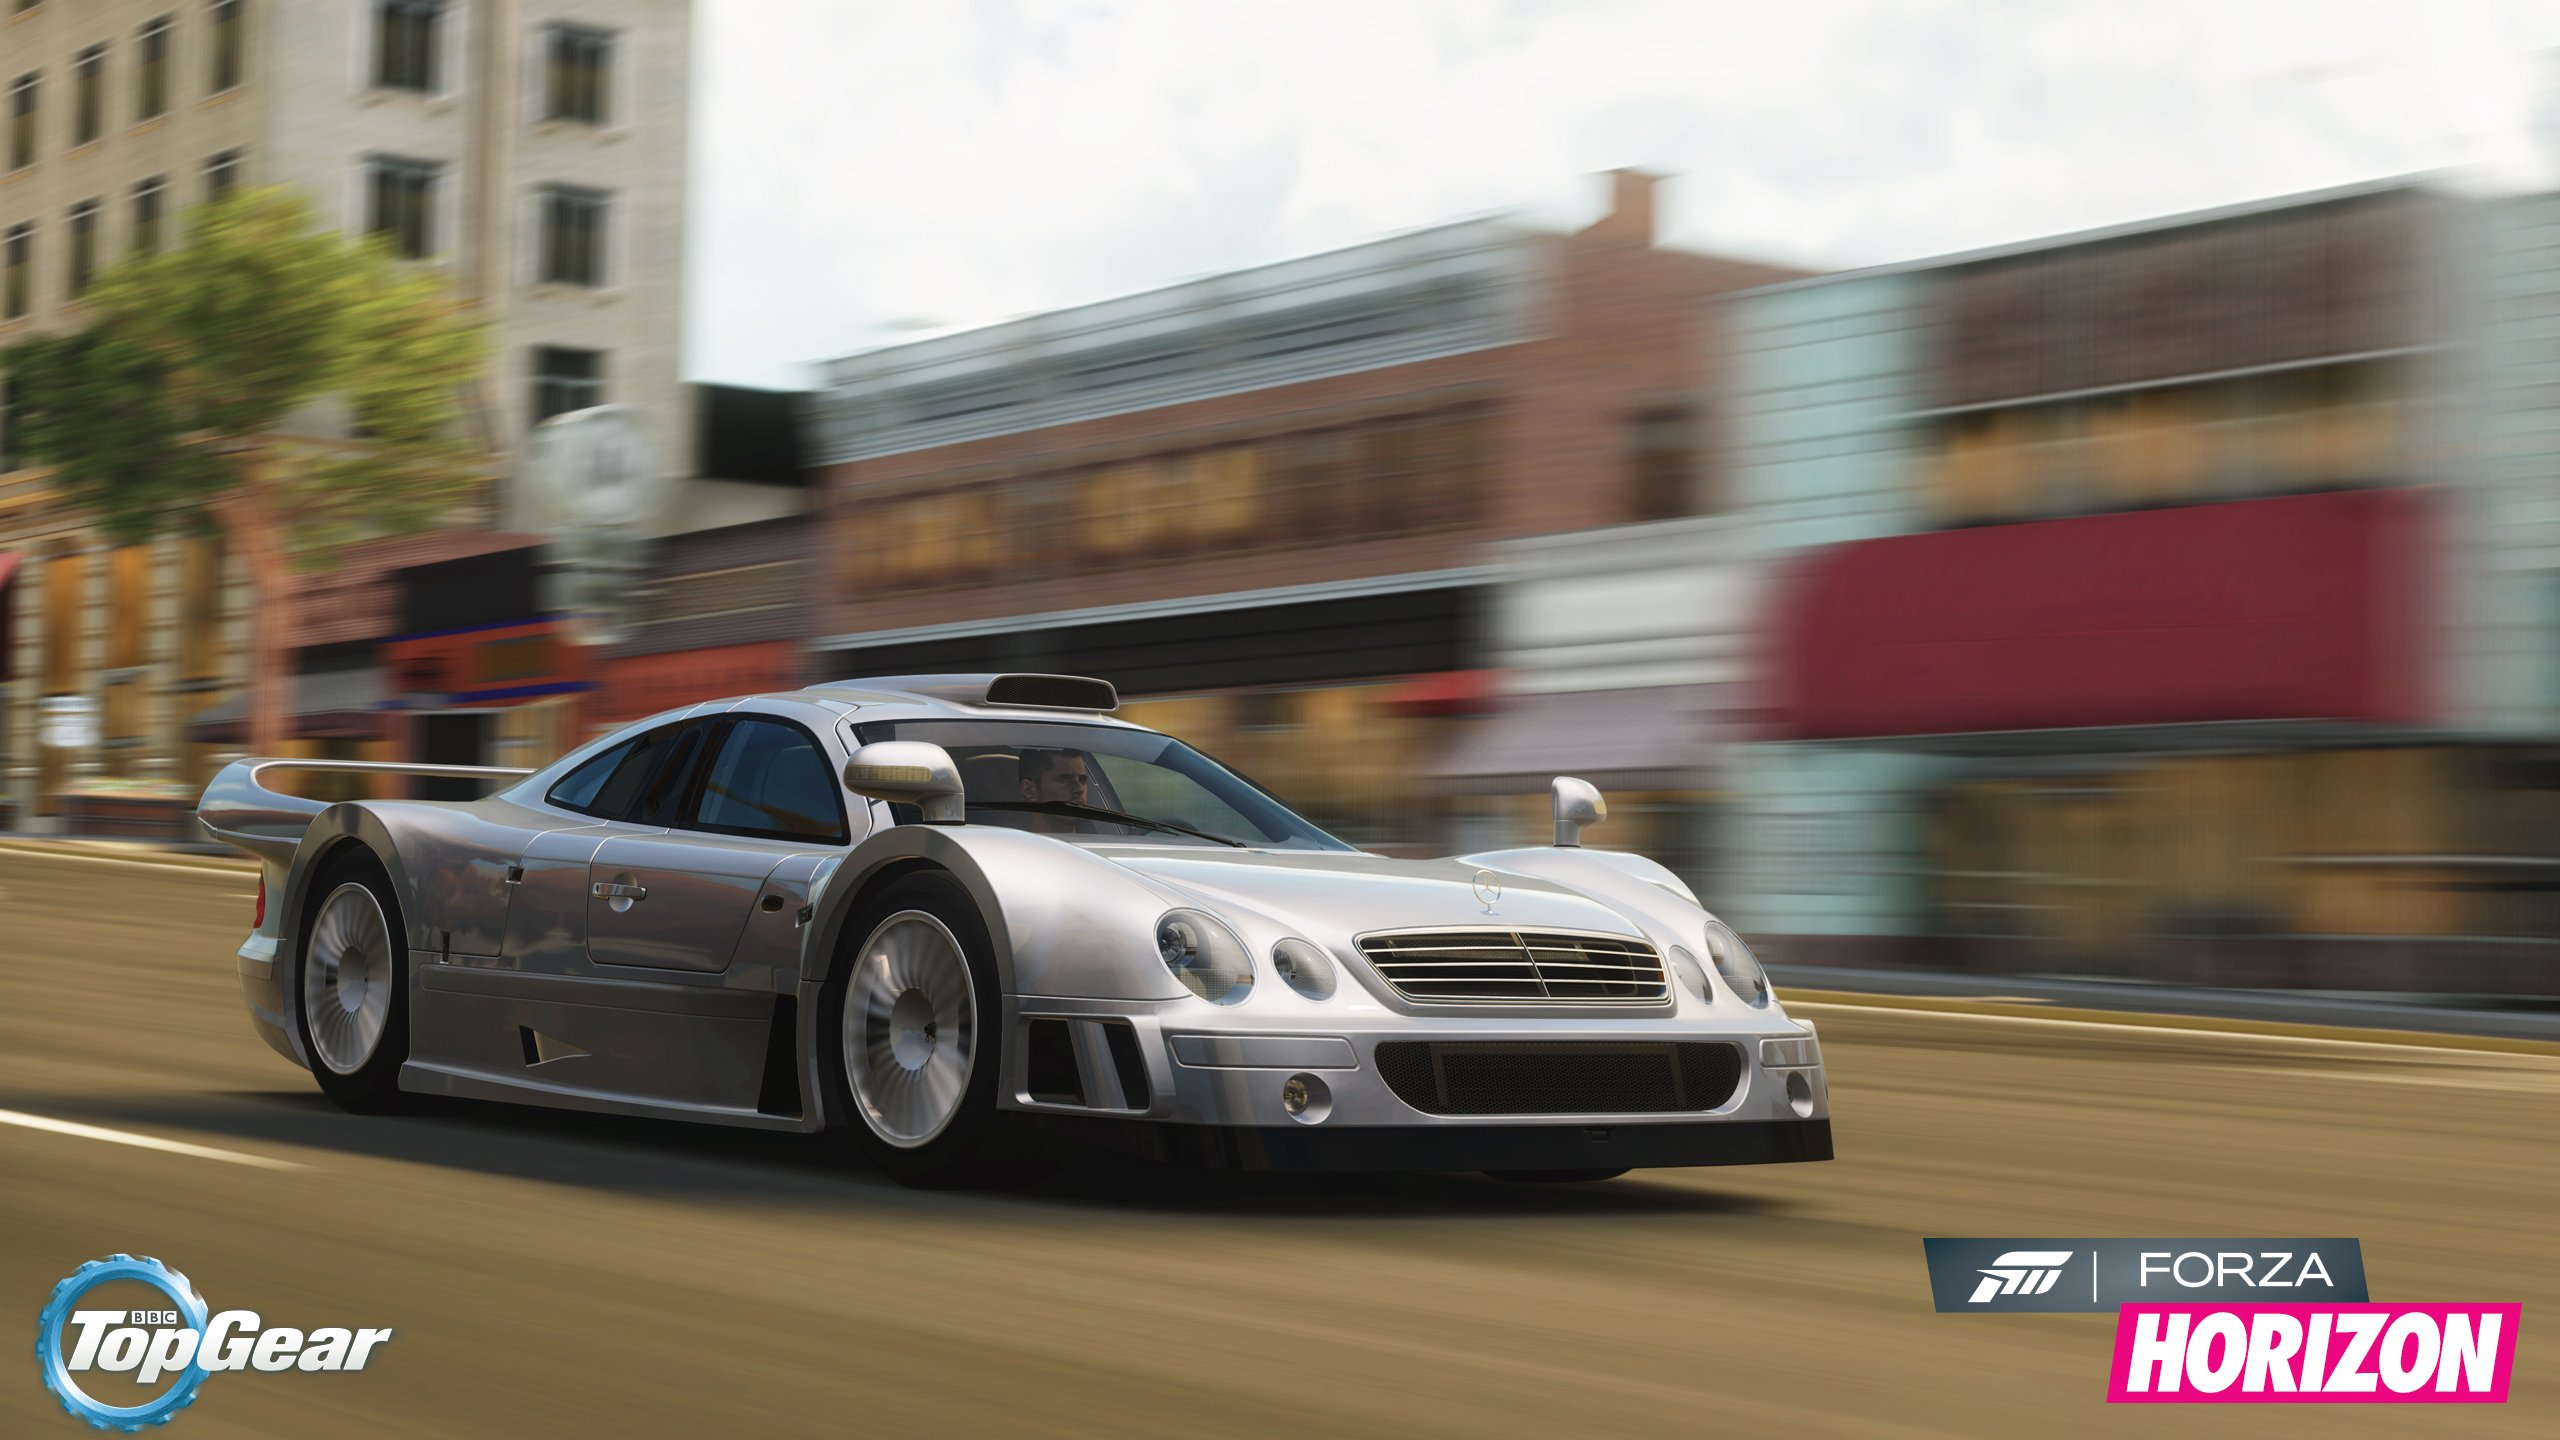 April Top Gear Car Pack available now for Forza Horizon